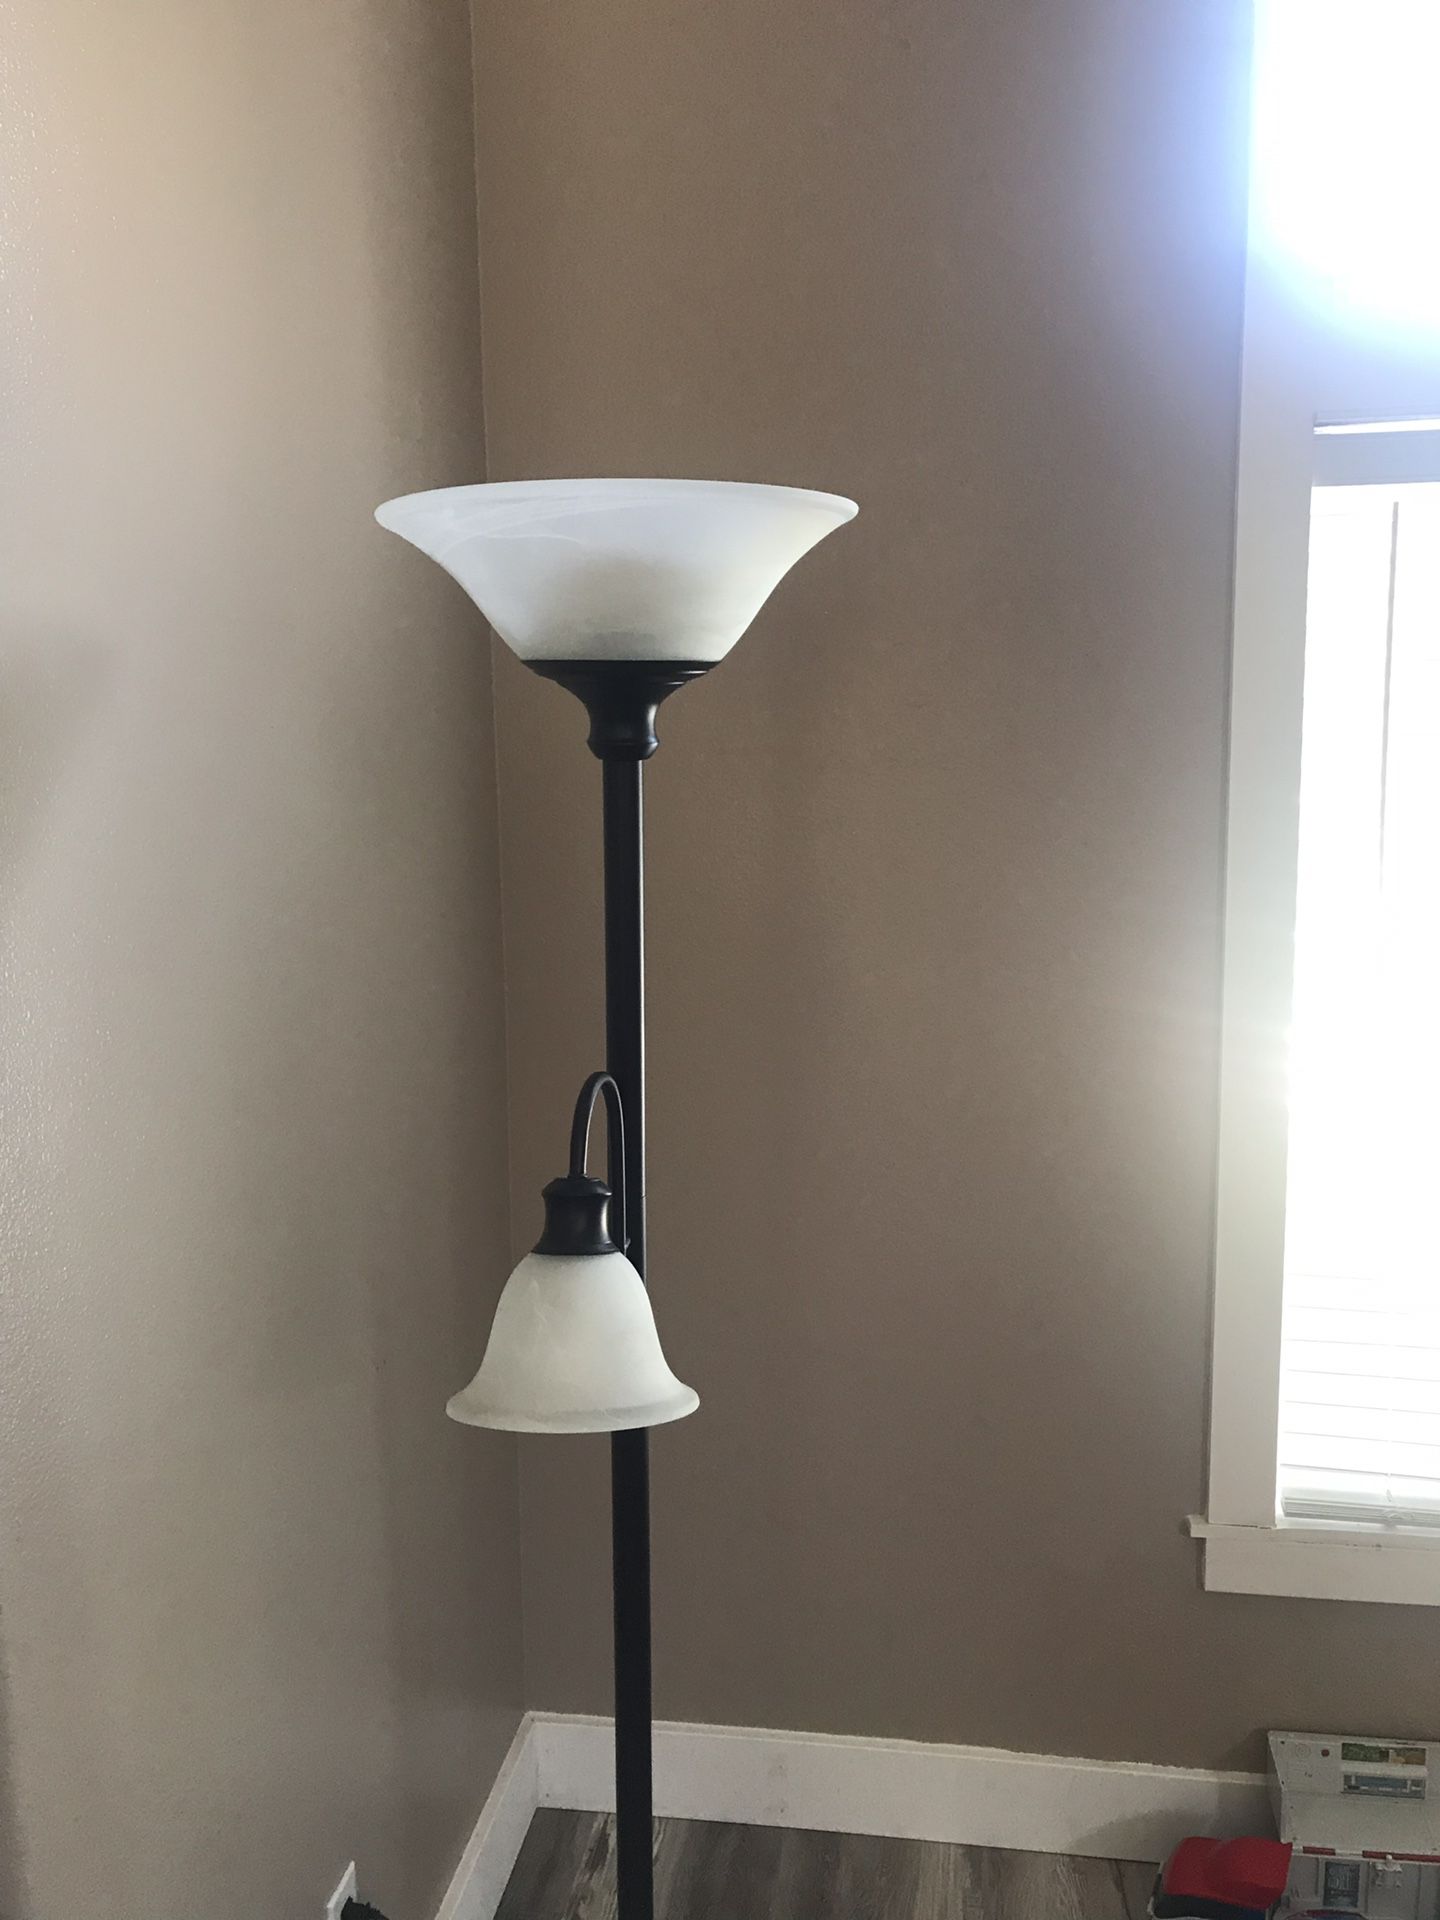 6’ floor lamp with reading lamp